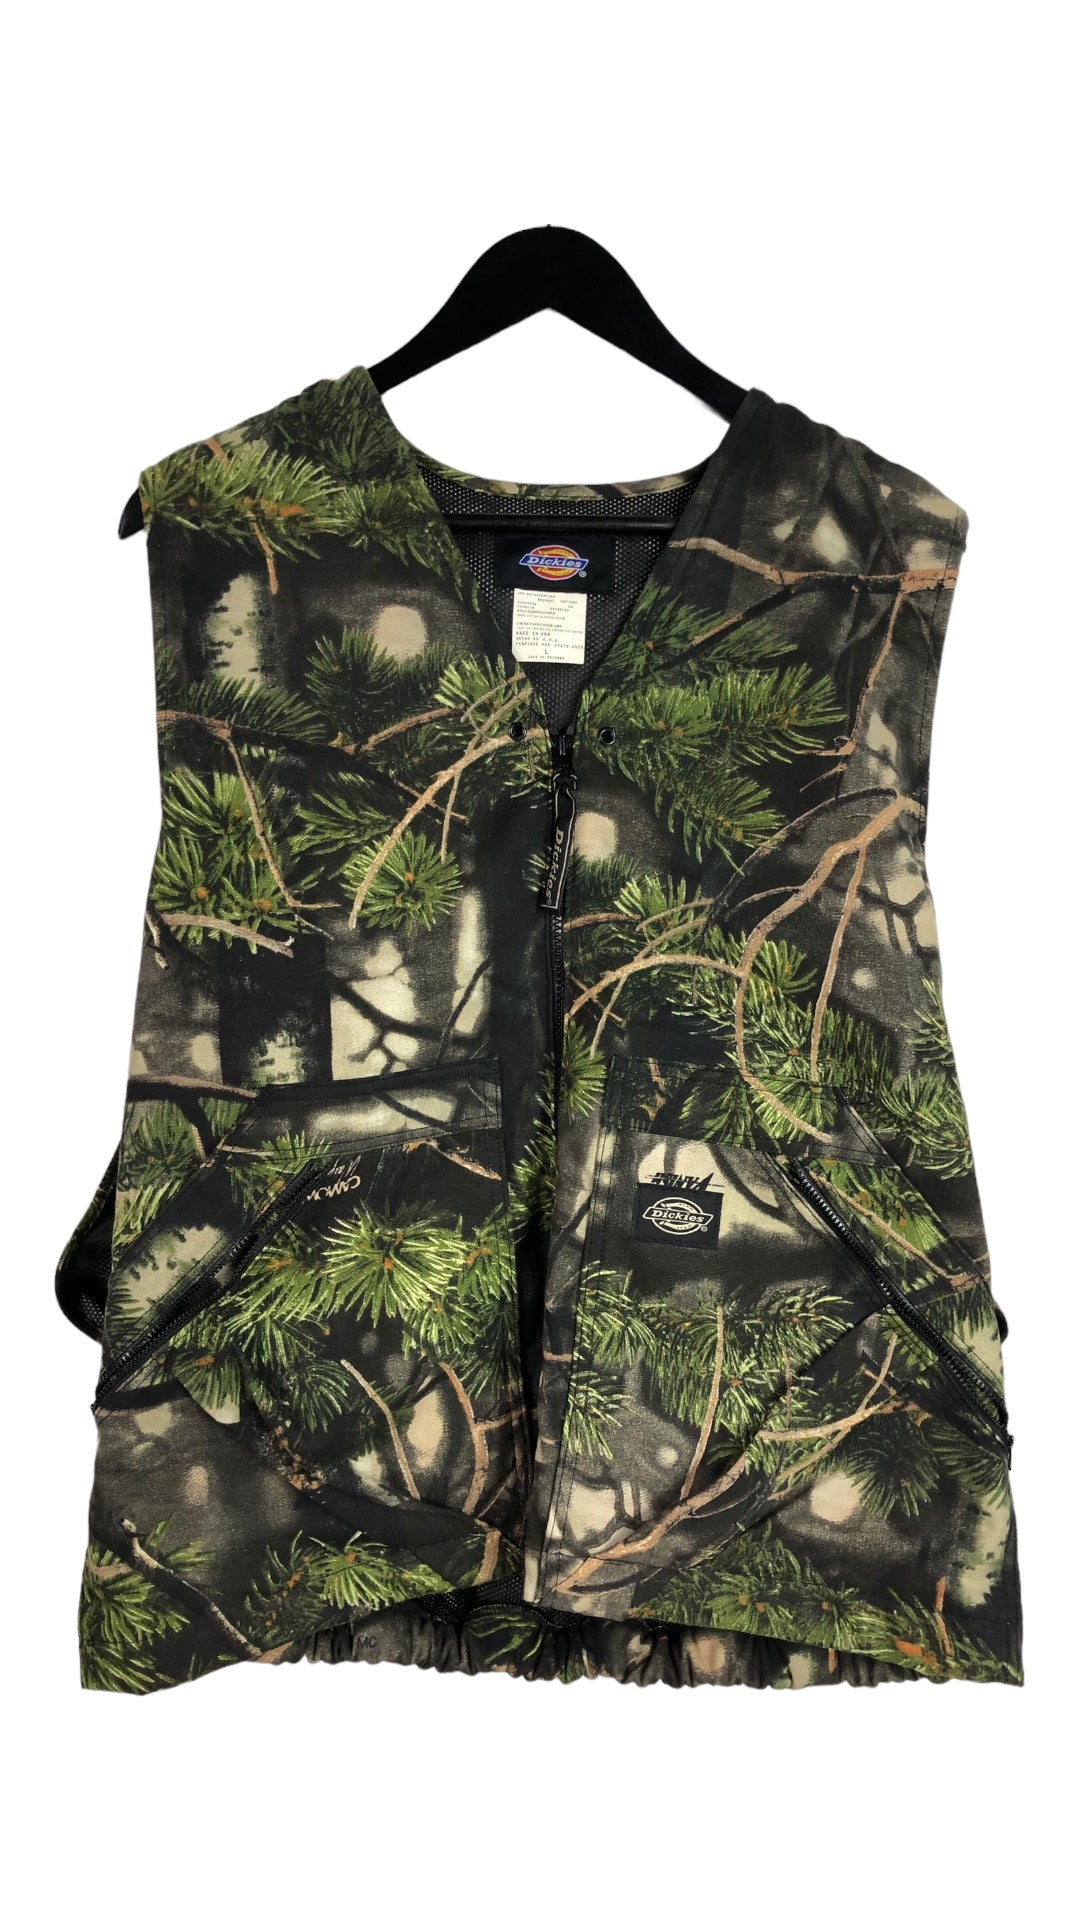 Dickies Vanish Camo Vest With Attached Backpack sz L